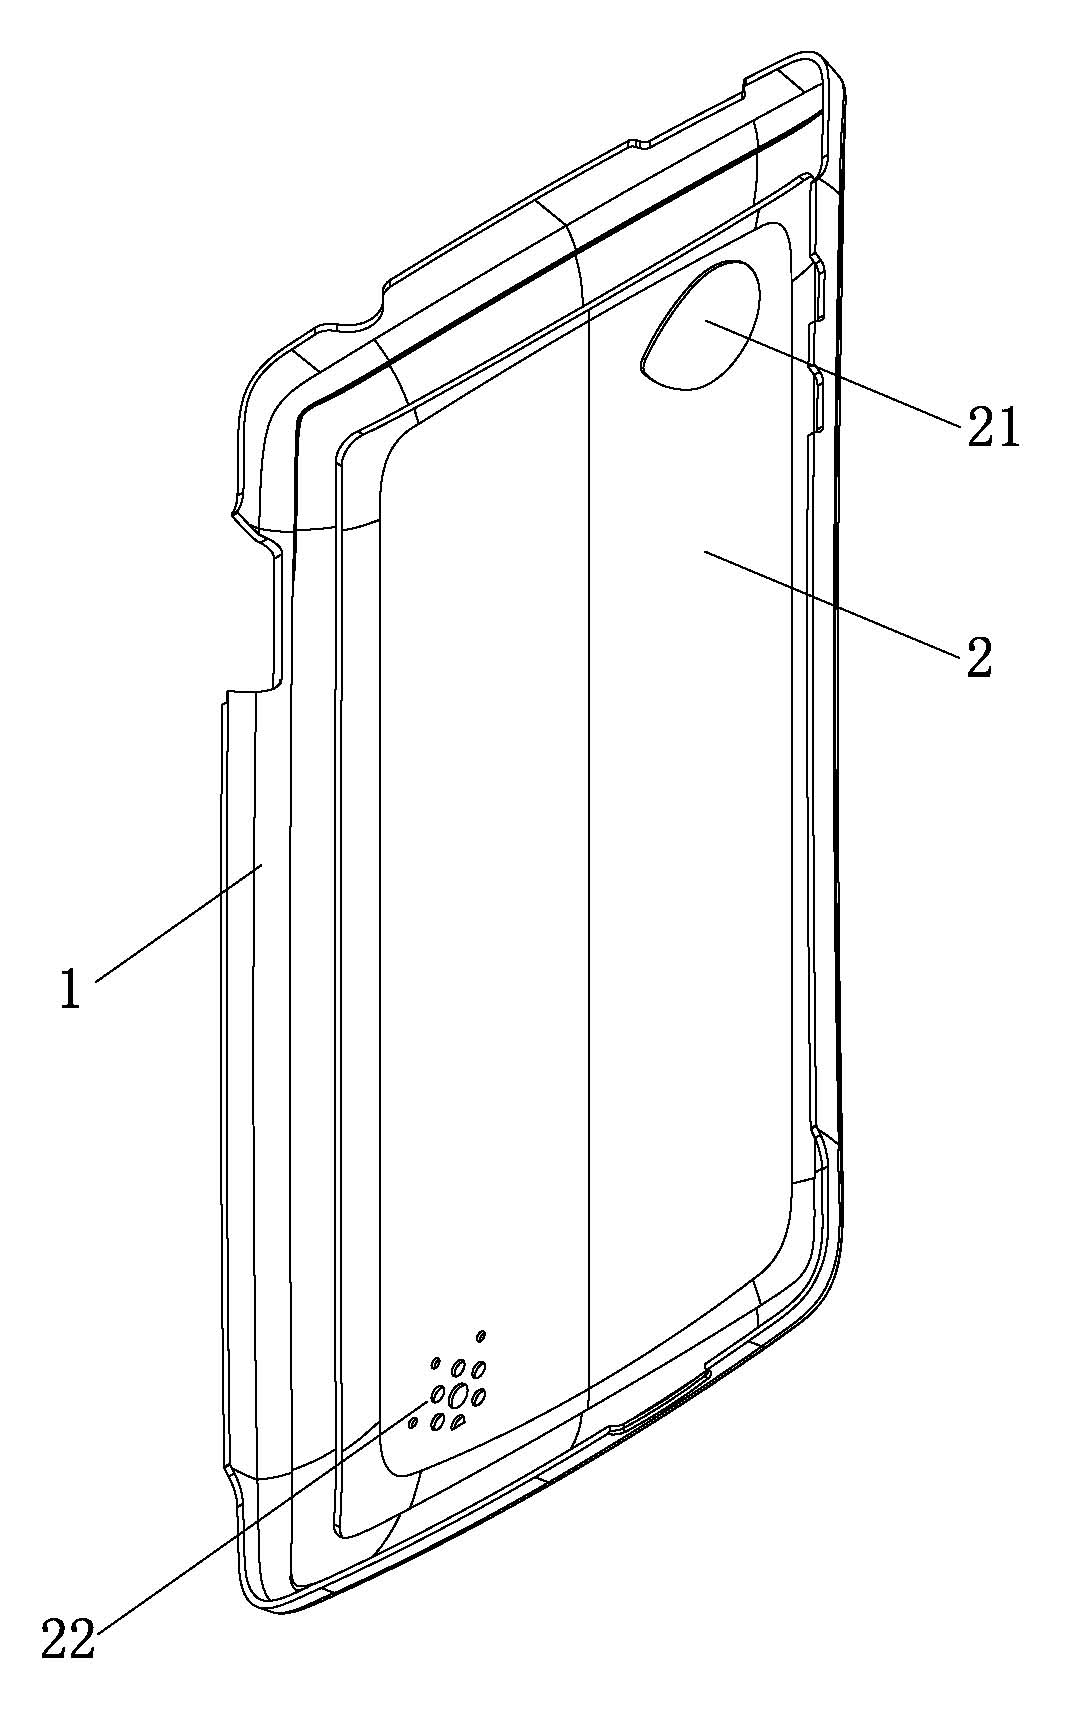 Ultrathin battery cover made of curved-surface carbon fiber material and manufacturing process of ultrathin battery cover